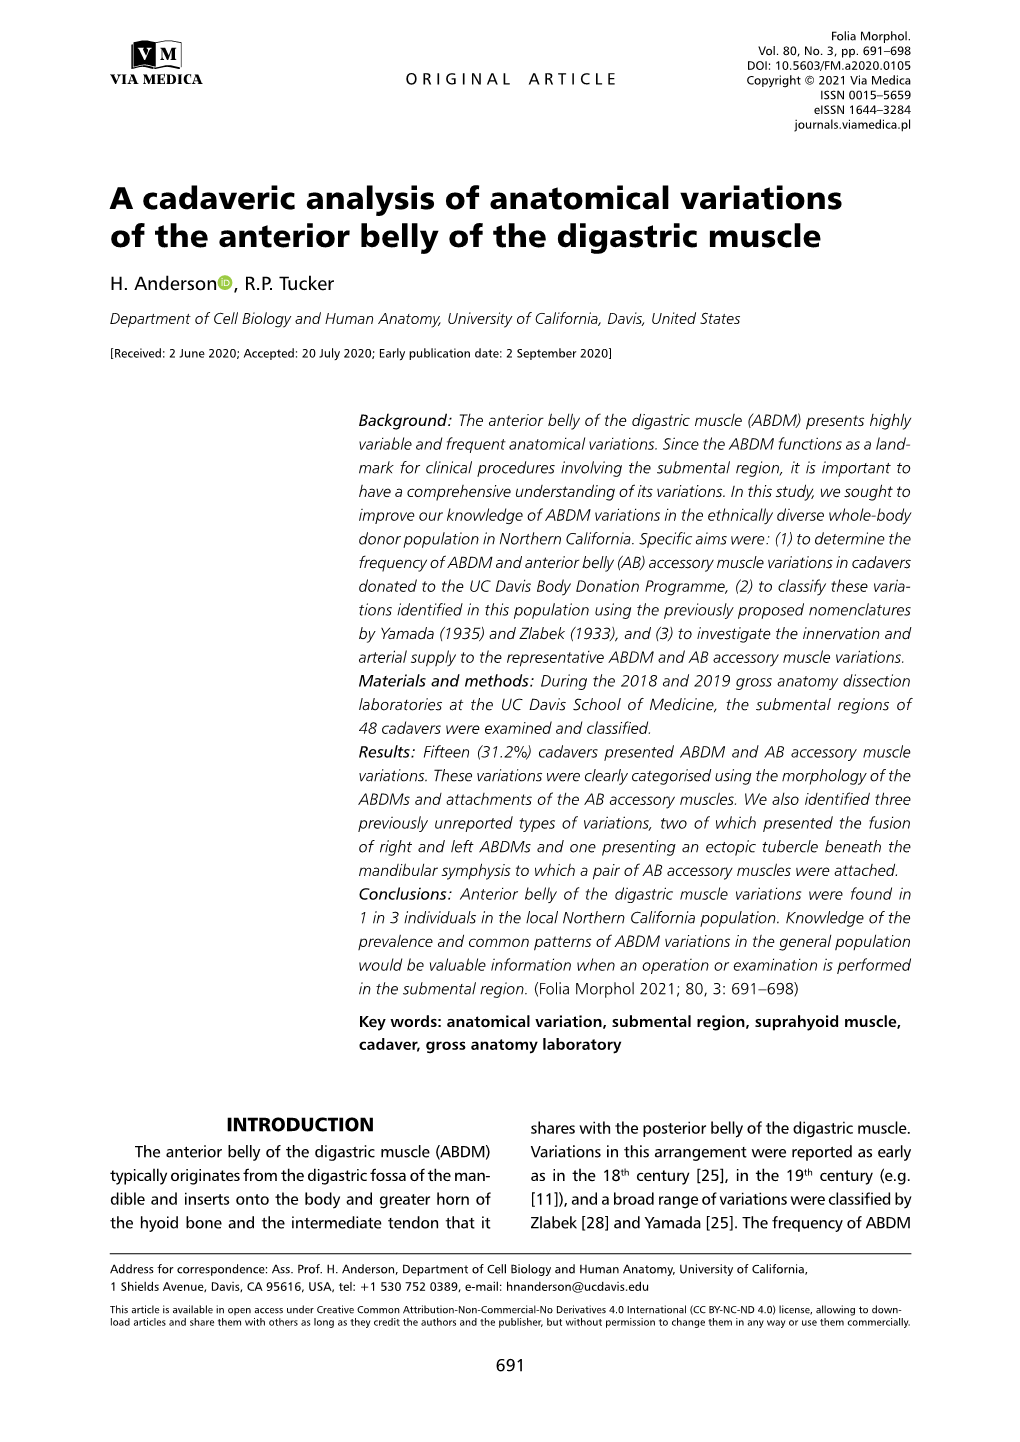 A Cadaveric Analysis of Anatomical Variations of the Anterior Belly of the Digastric Muscle H